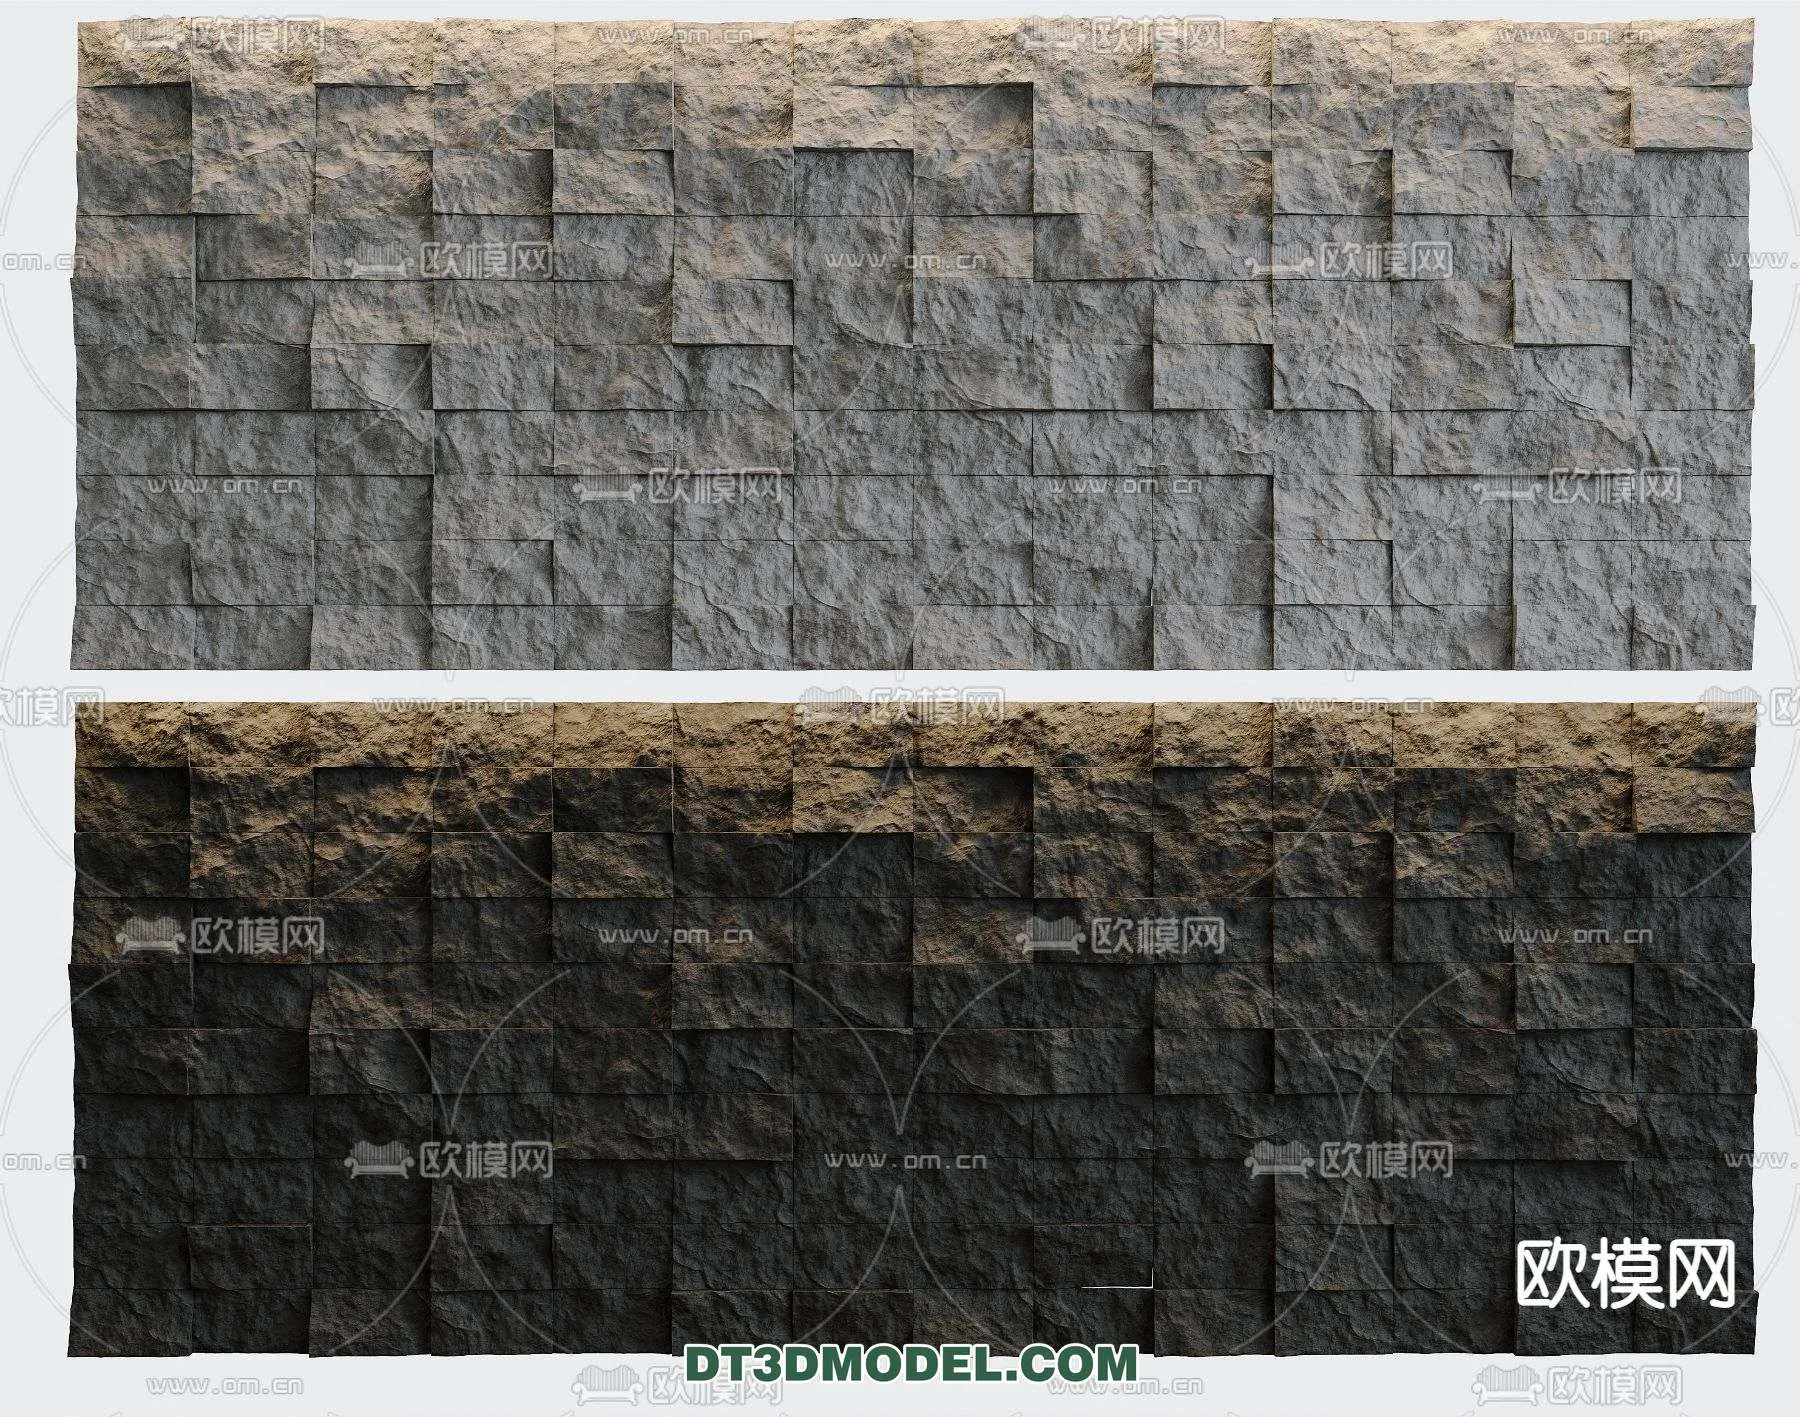 MATERIAL – TEXTURES – ROCK WALL – 0047